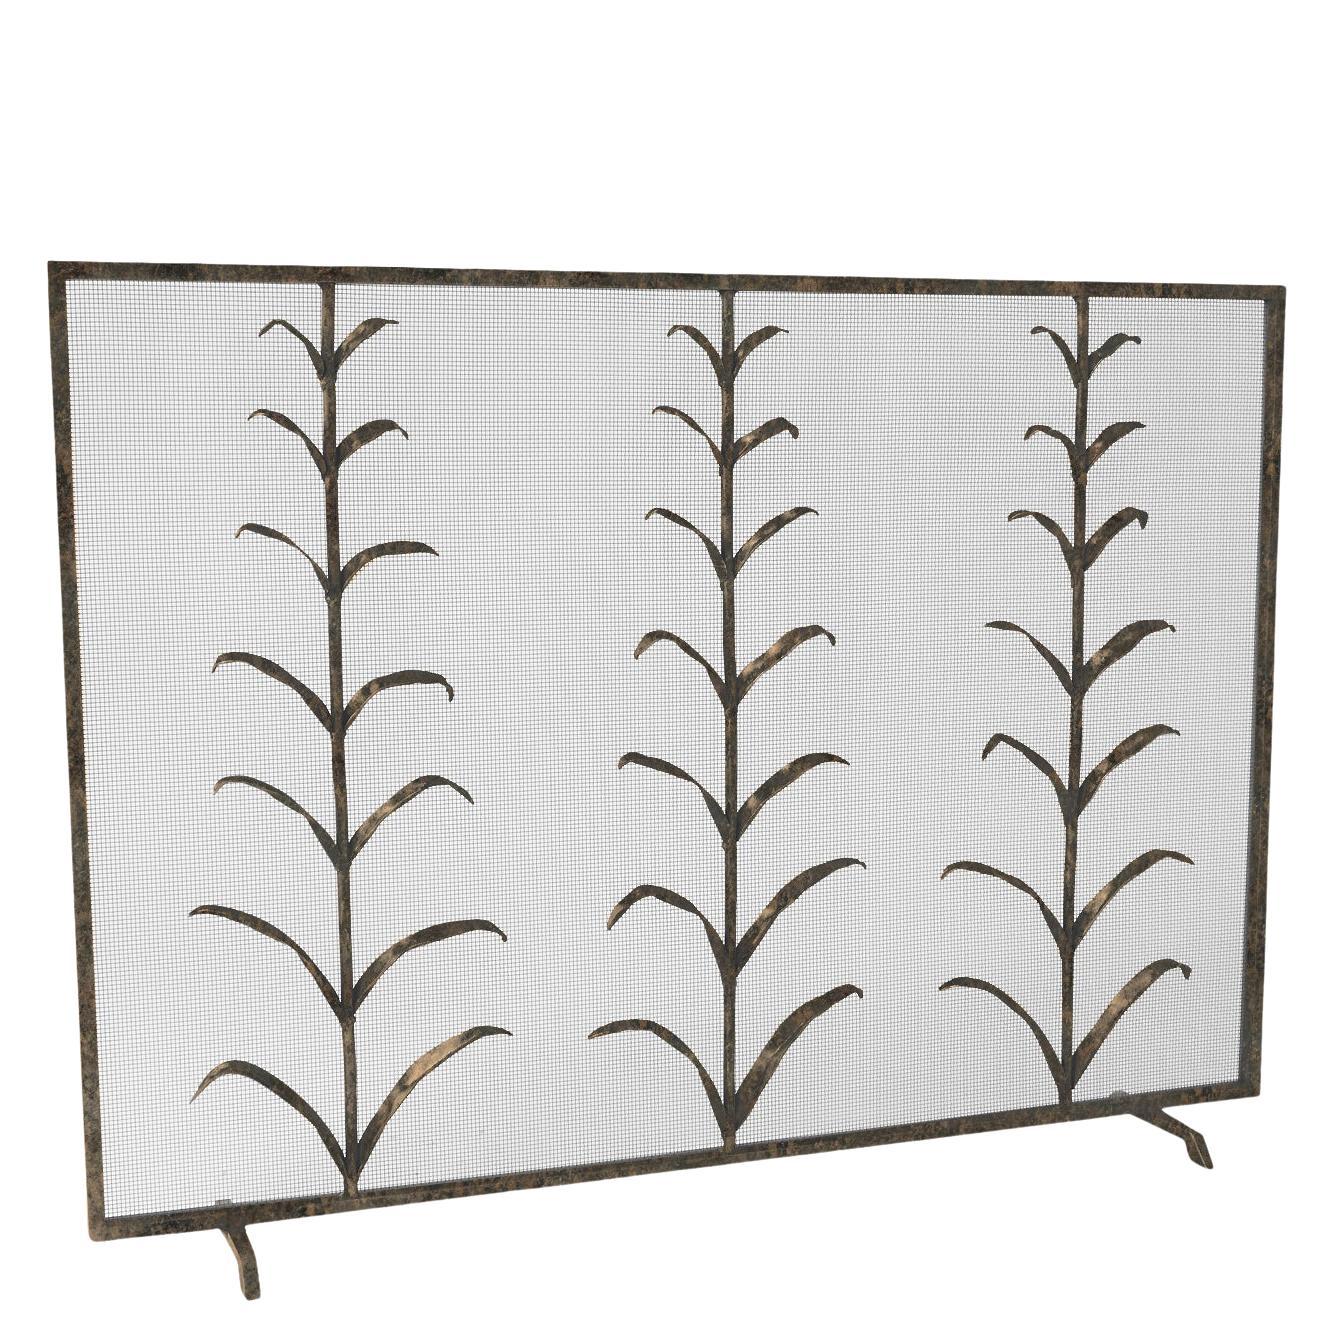 Lily Stems Fireplace Screen Warm Black For Sale